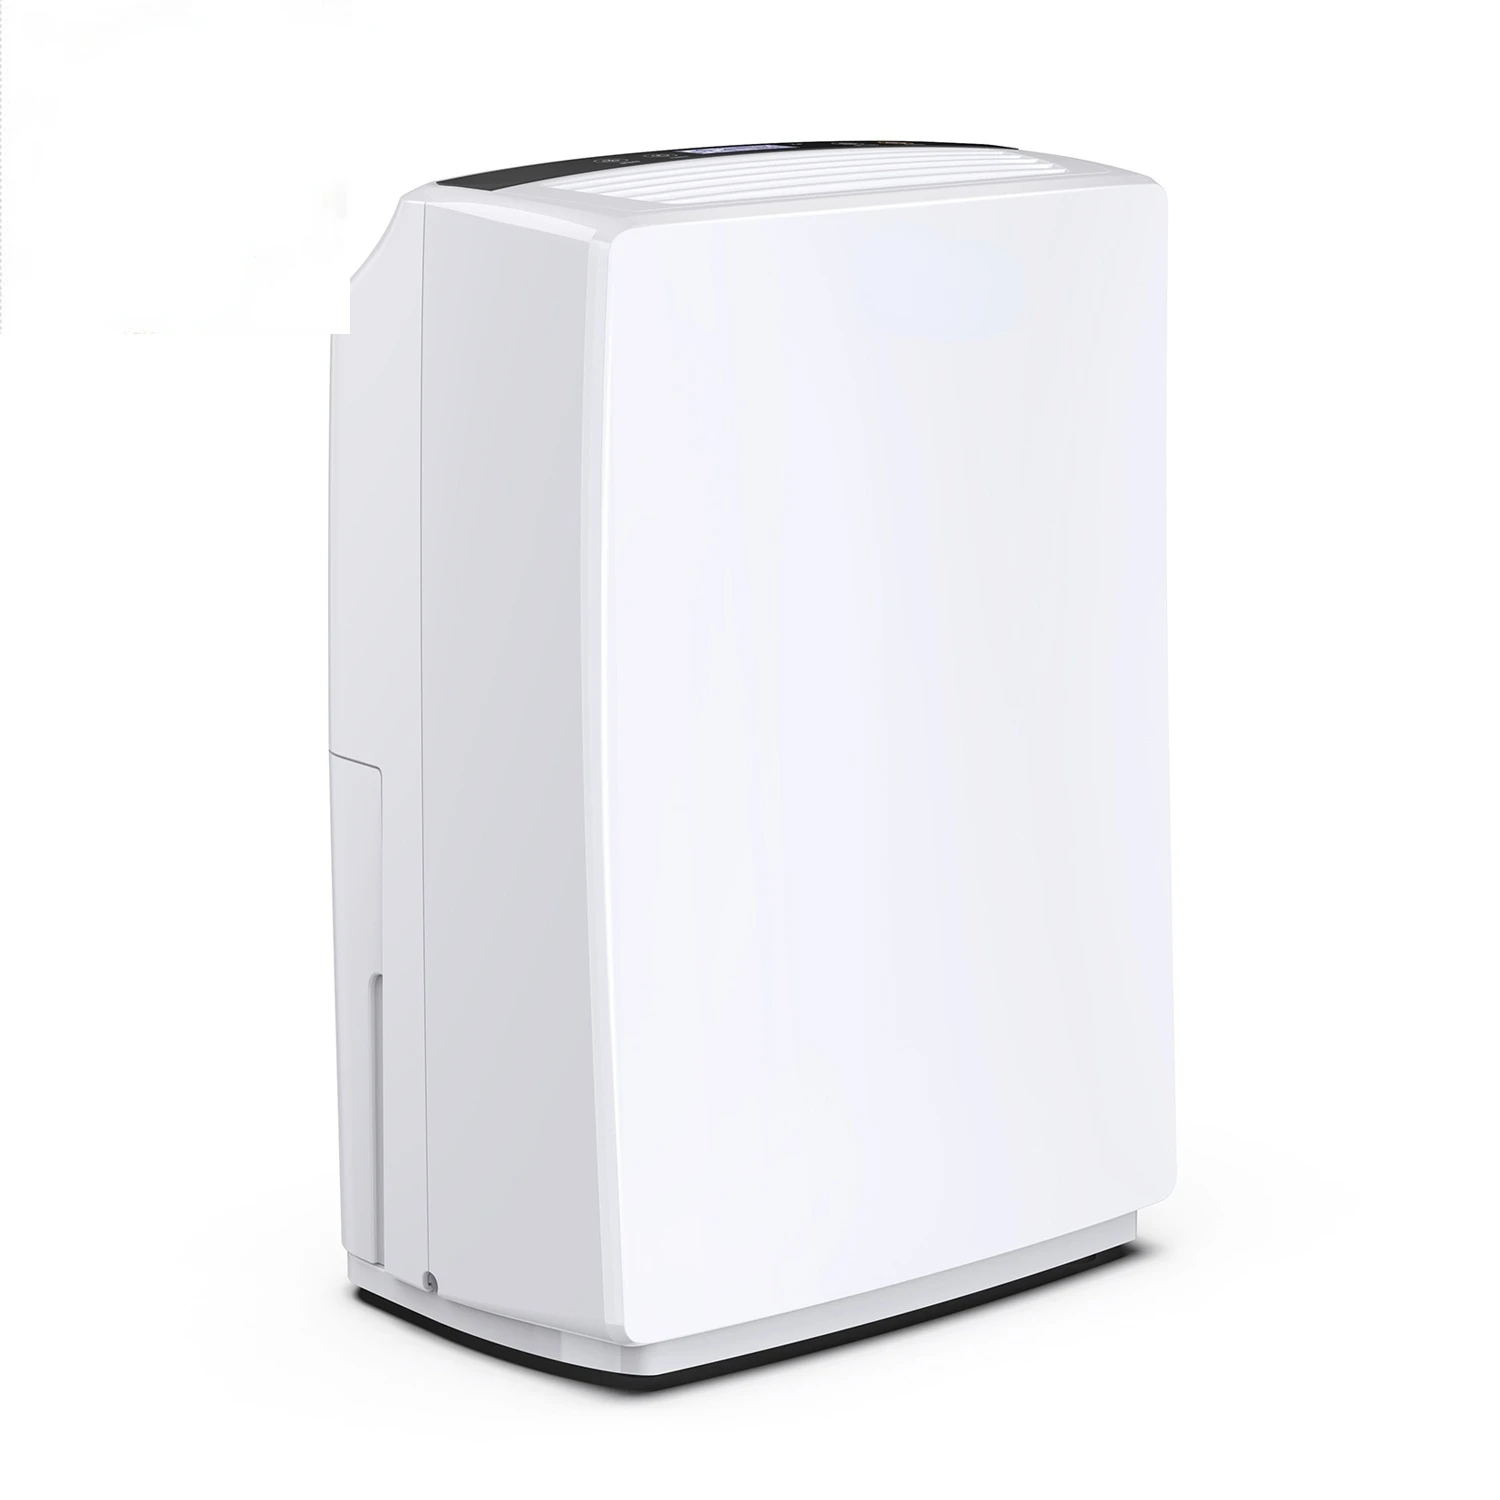 

Easy Operation Reasonable Prices 30 Pint Dehumidifier Portable Dehumidifier Home With Humidity Control